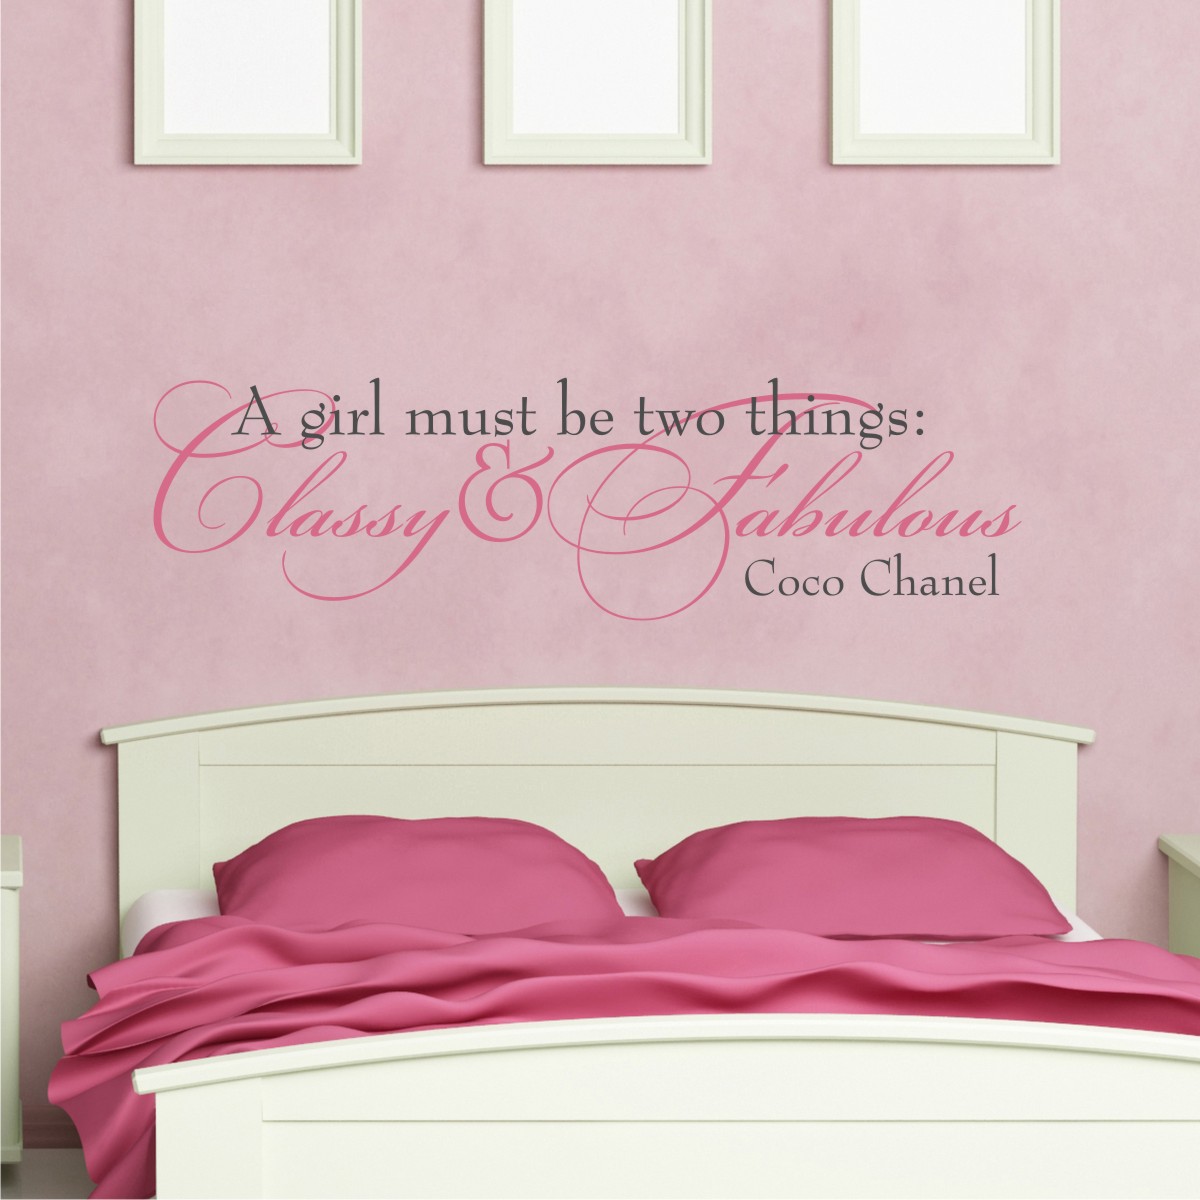 40+ Exclusive Wall Quotes For Bedroom - FunPulp